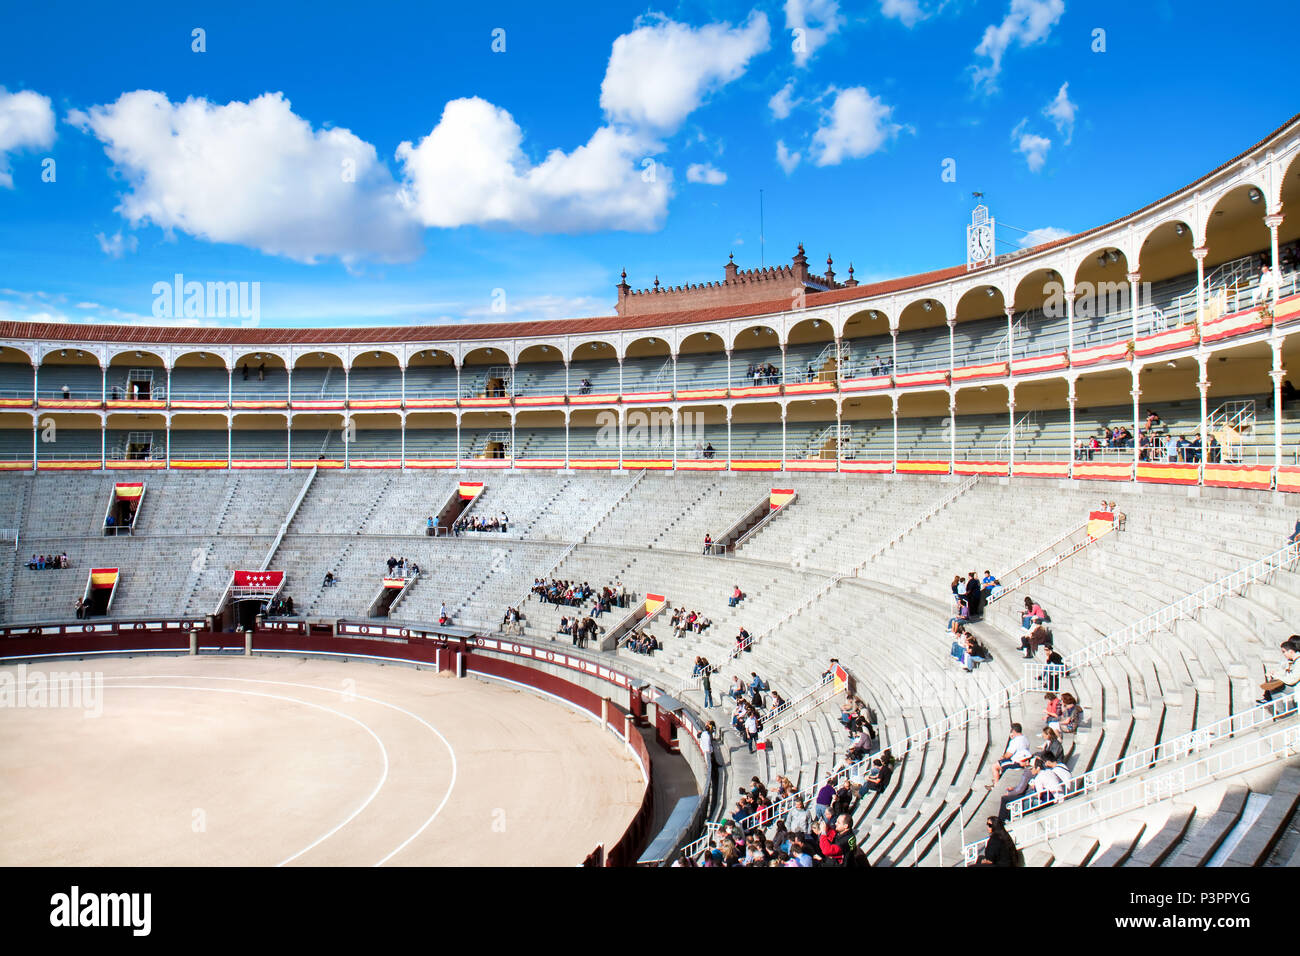 MADRID-OKTOBER 17: Plaza de Toros de las Ventas, one of the largest rings  in the bullfighting world, has a grand Mudejar exterior and suitably  Colosse Stock Photo - Alamy